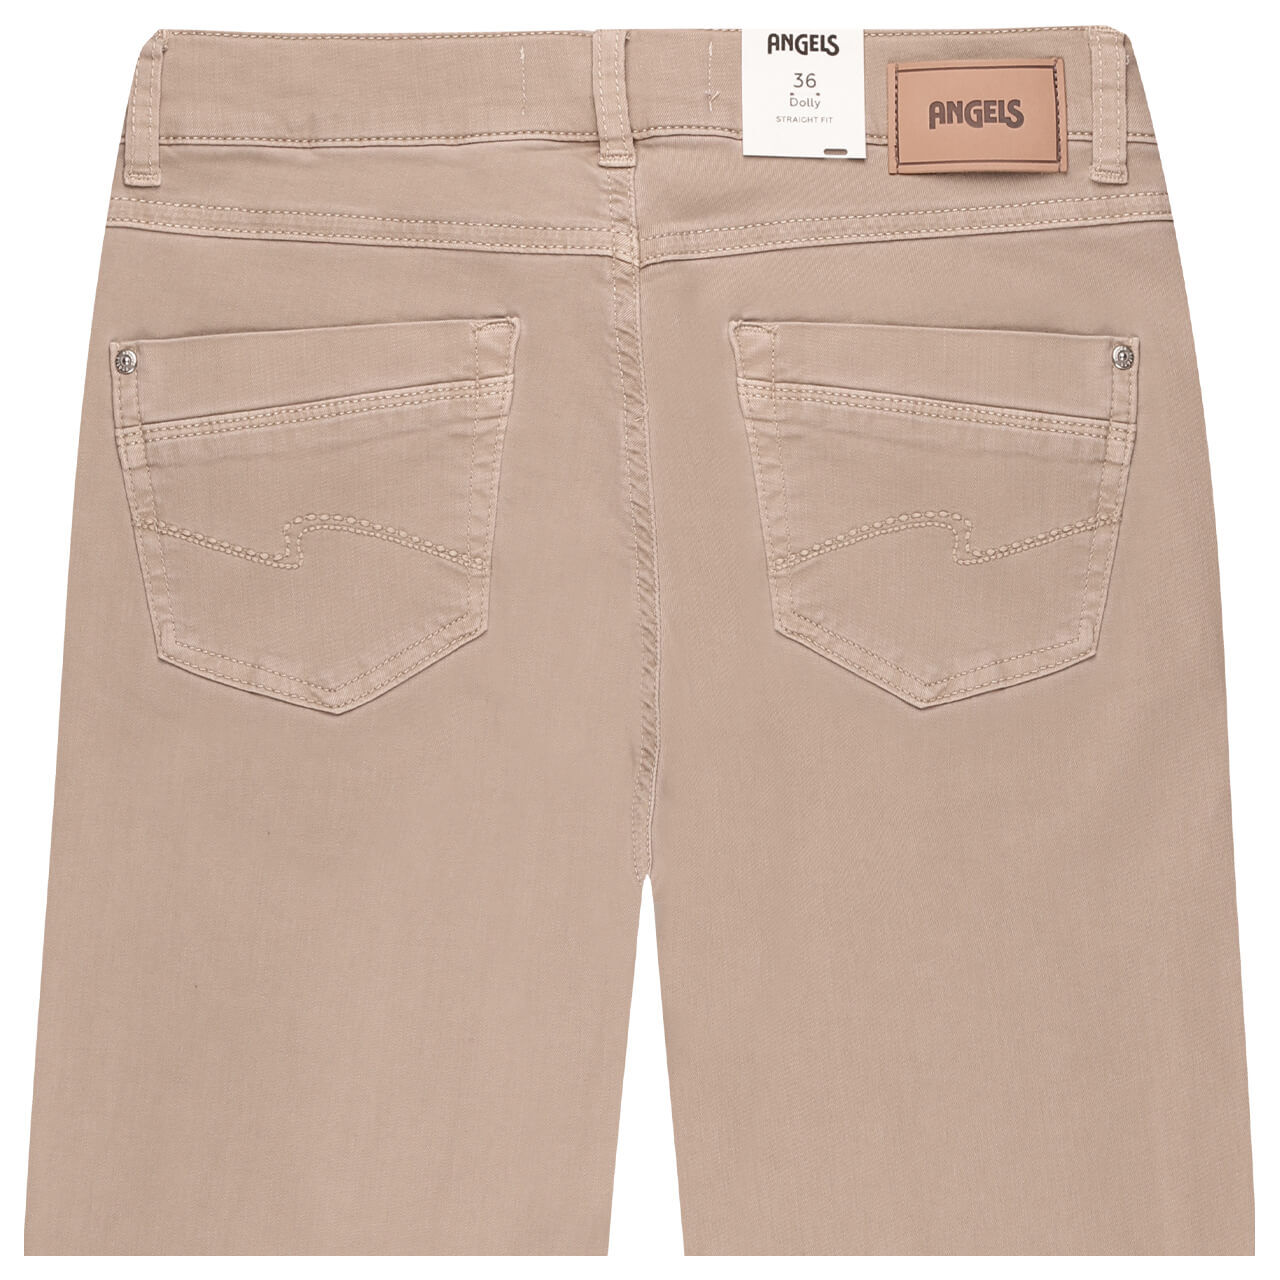 Angels Dolly Jeans sand